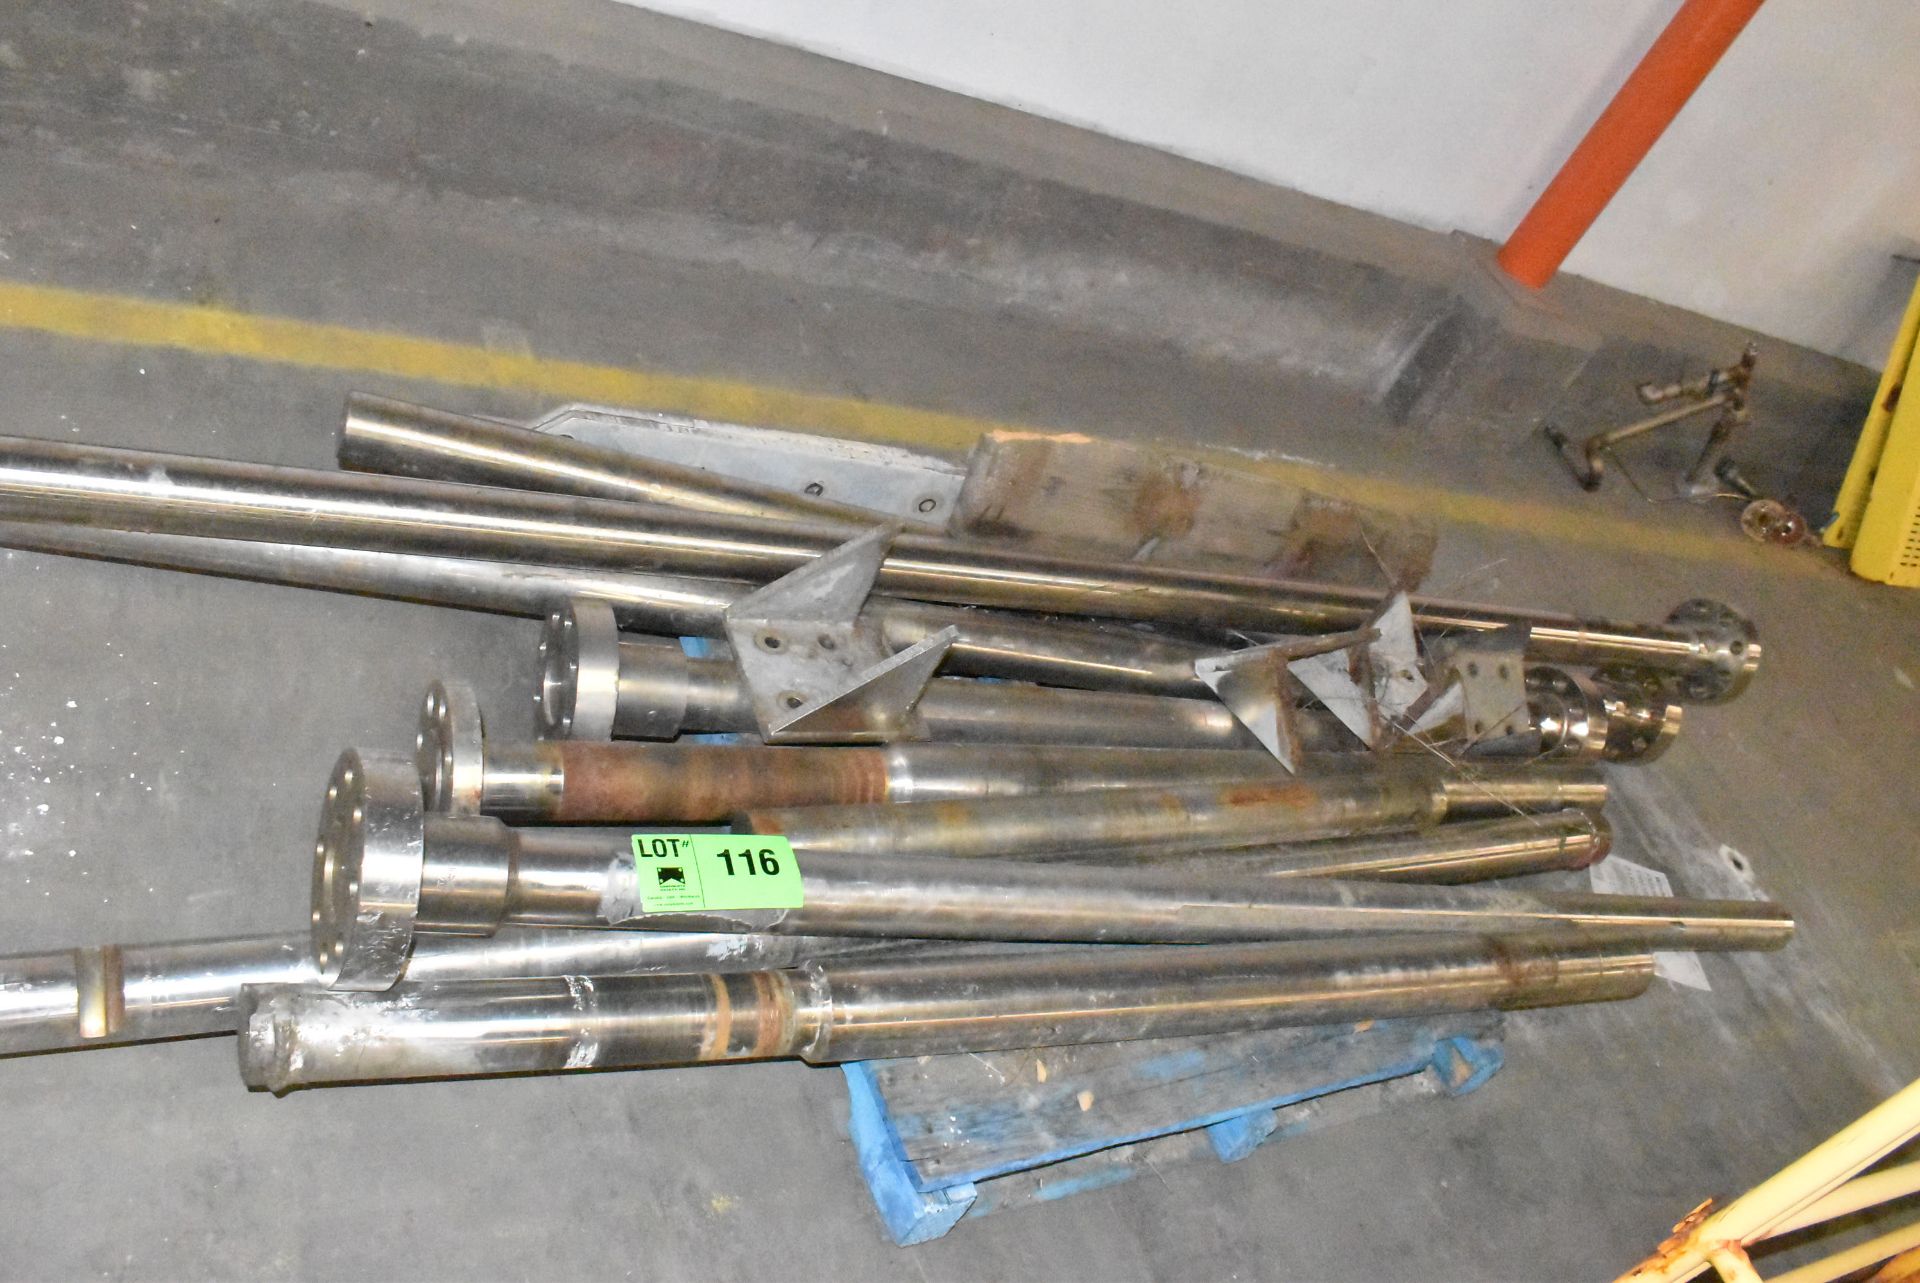 LOT/ FLANGED PIPES [RIGGING FEE FOR LOT #116 - $30 CAD PLUS APPLICABLE TAXES]